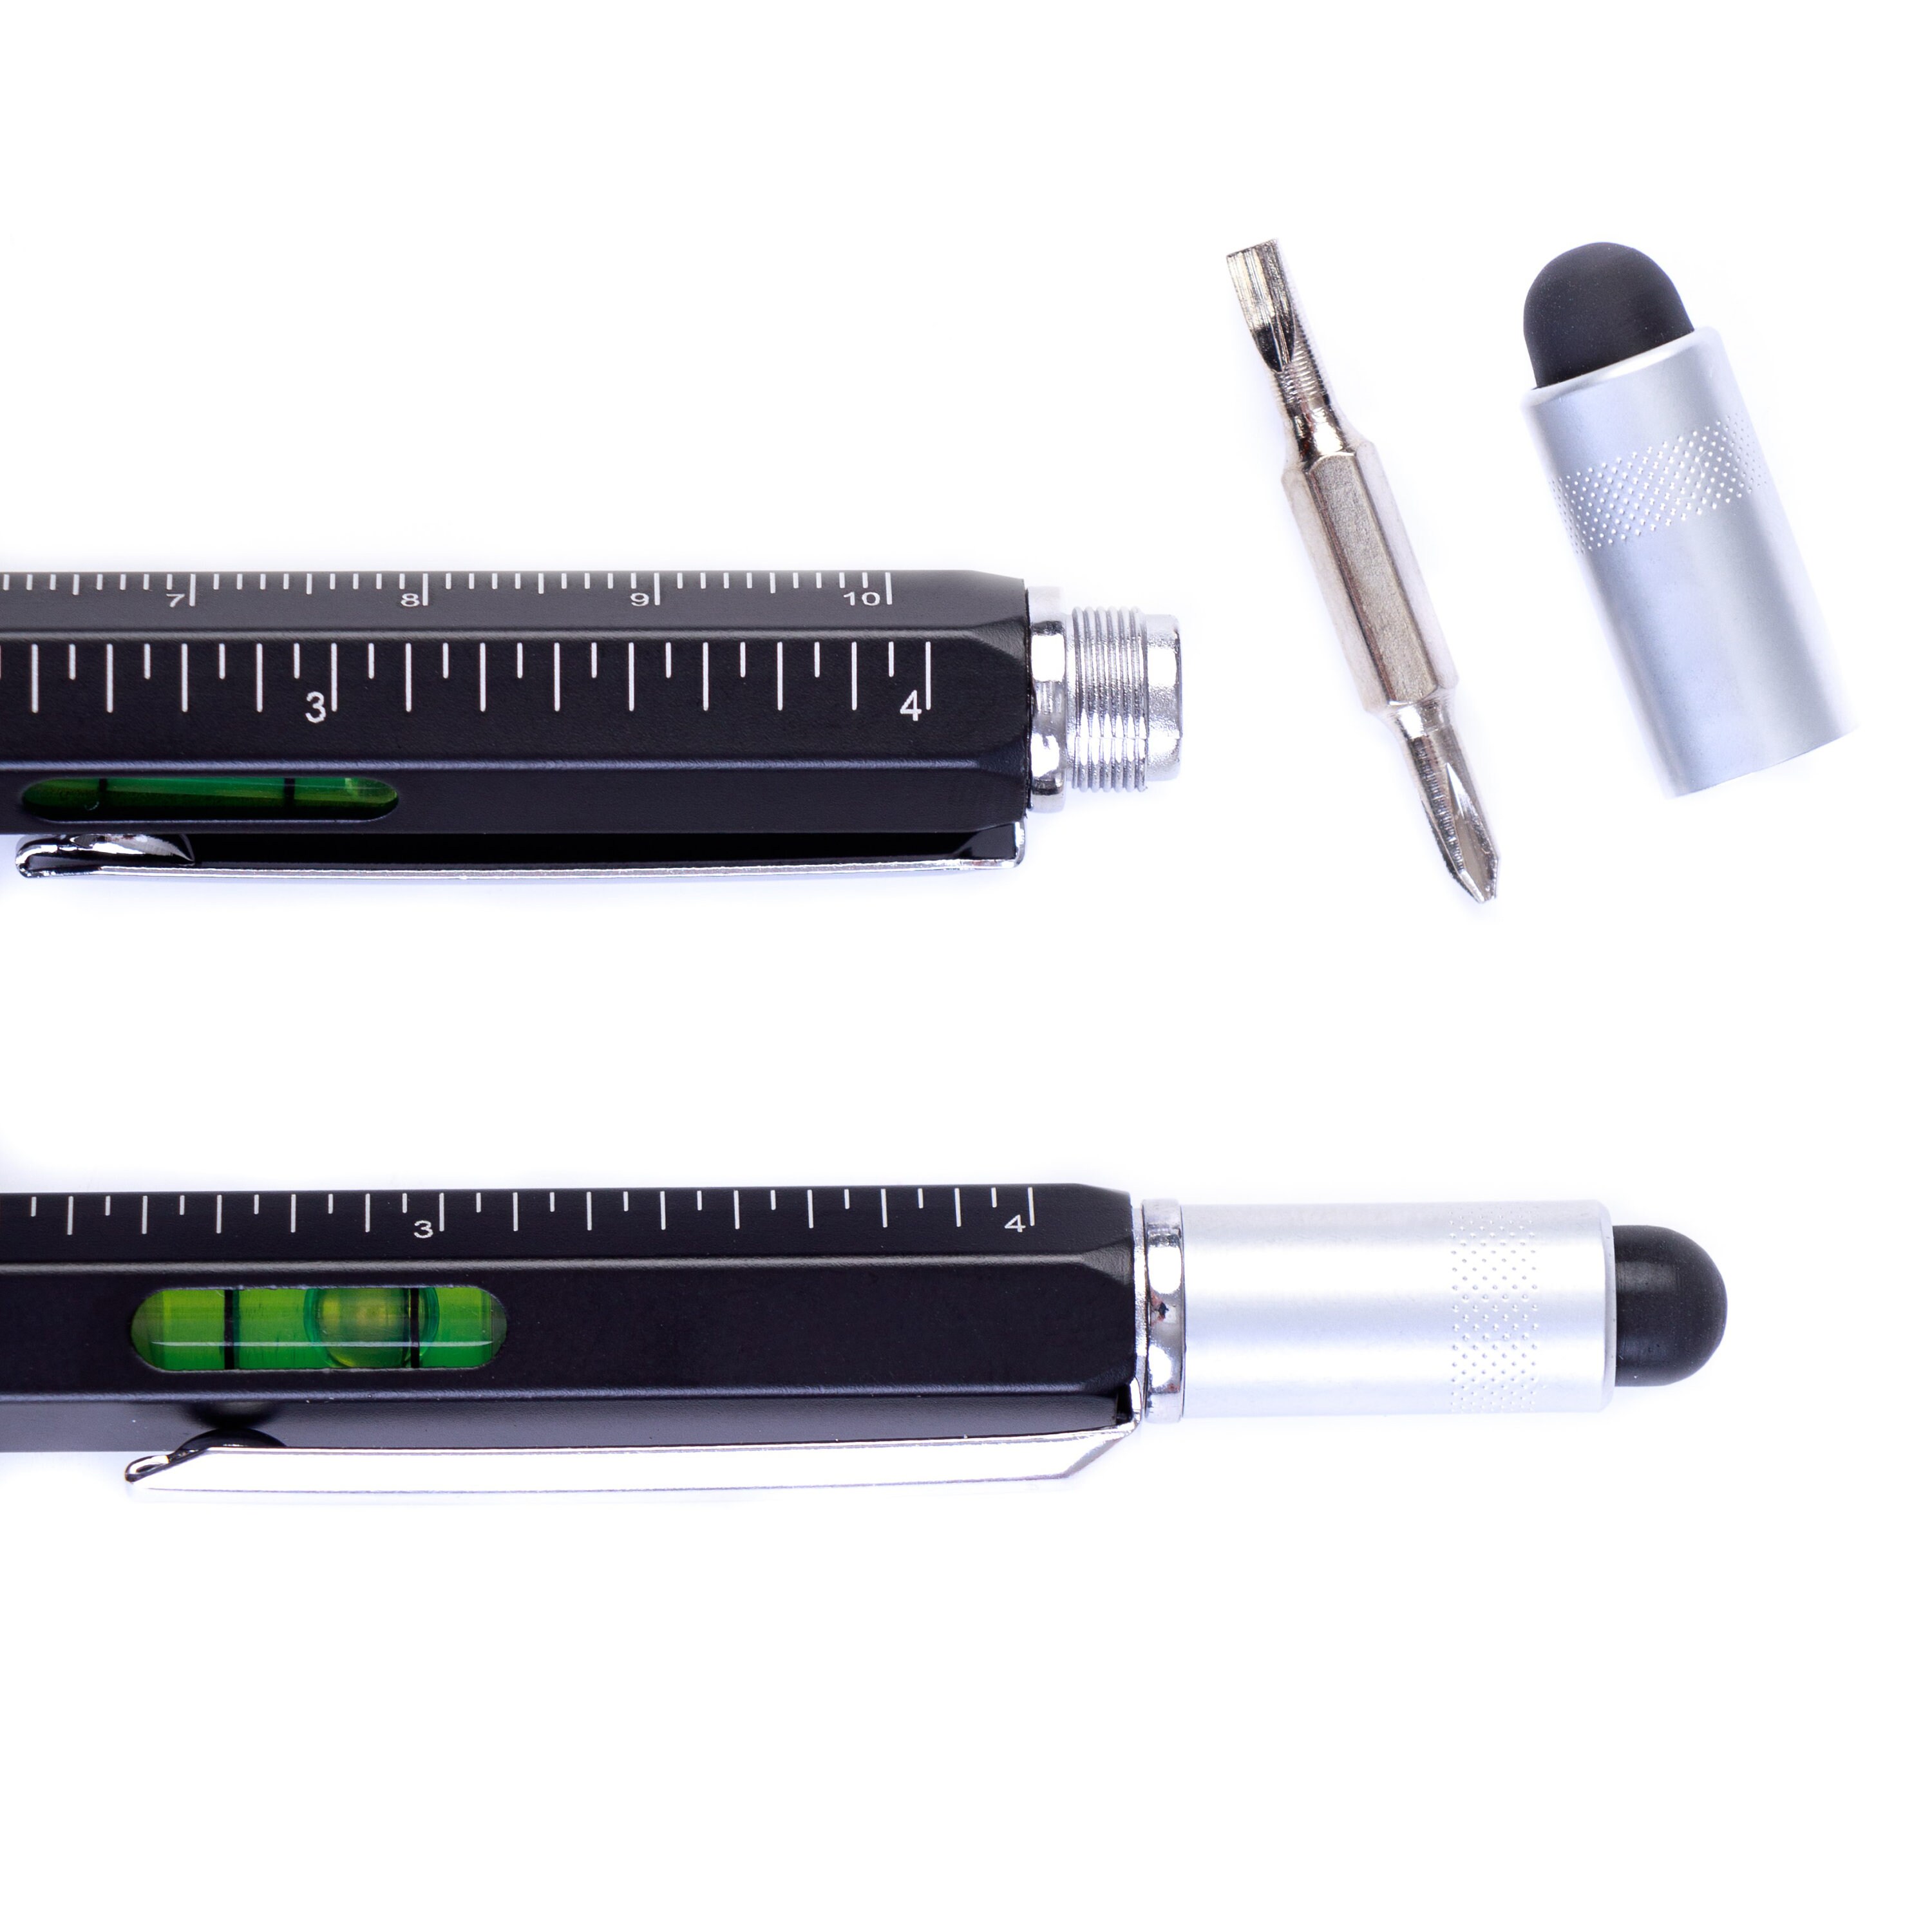 5. Personalized Engineer Pen